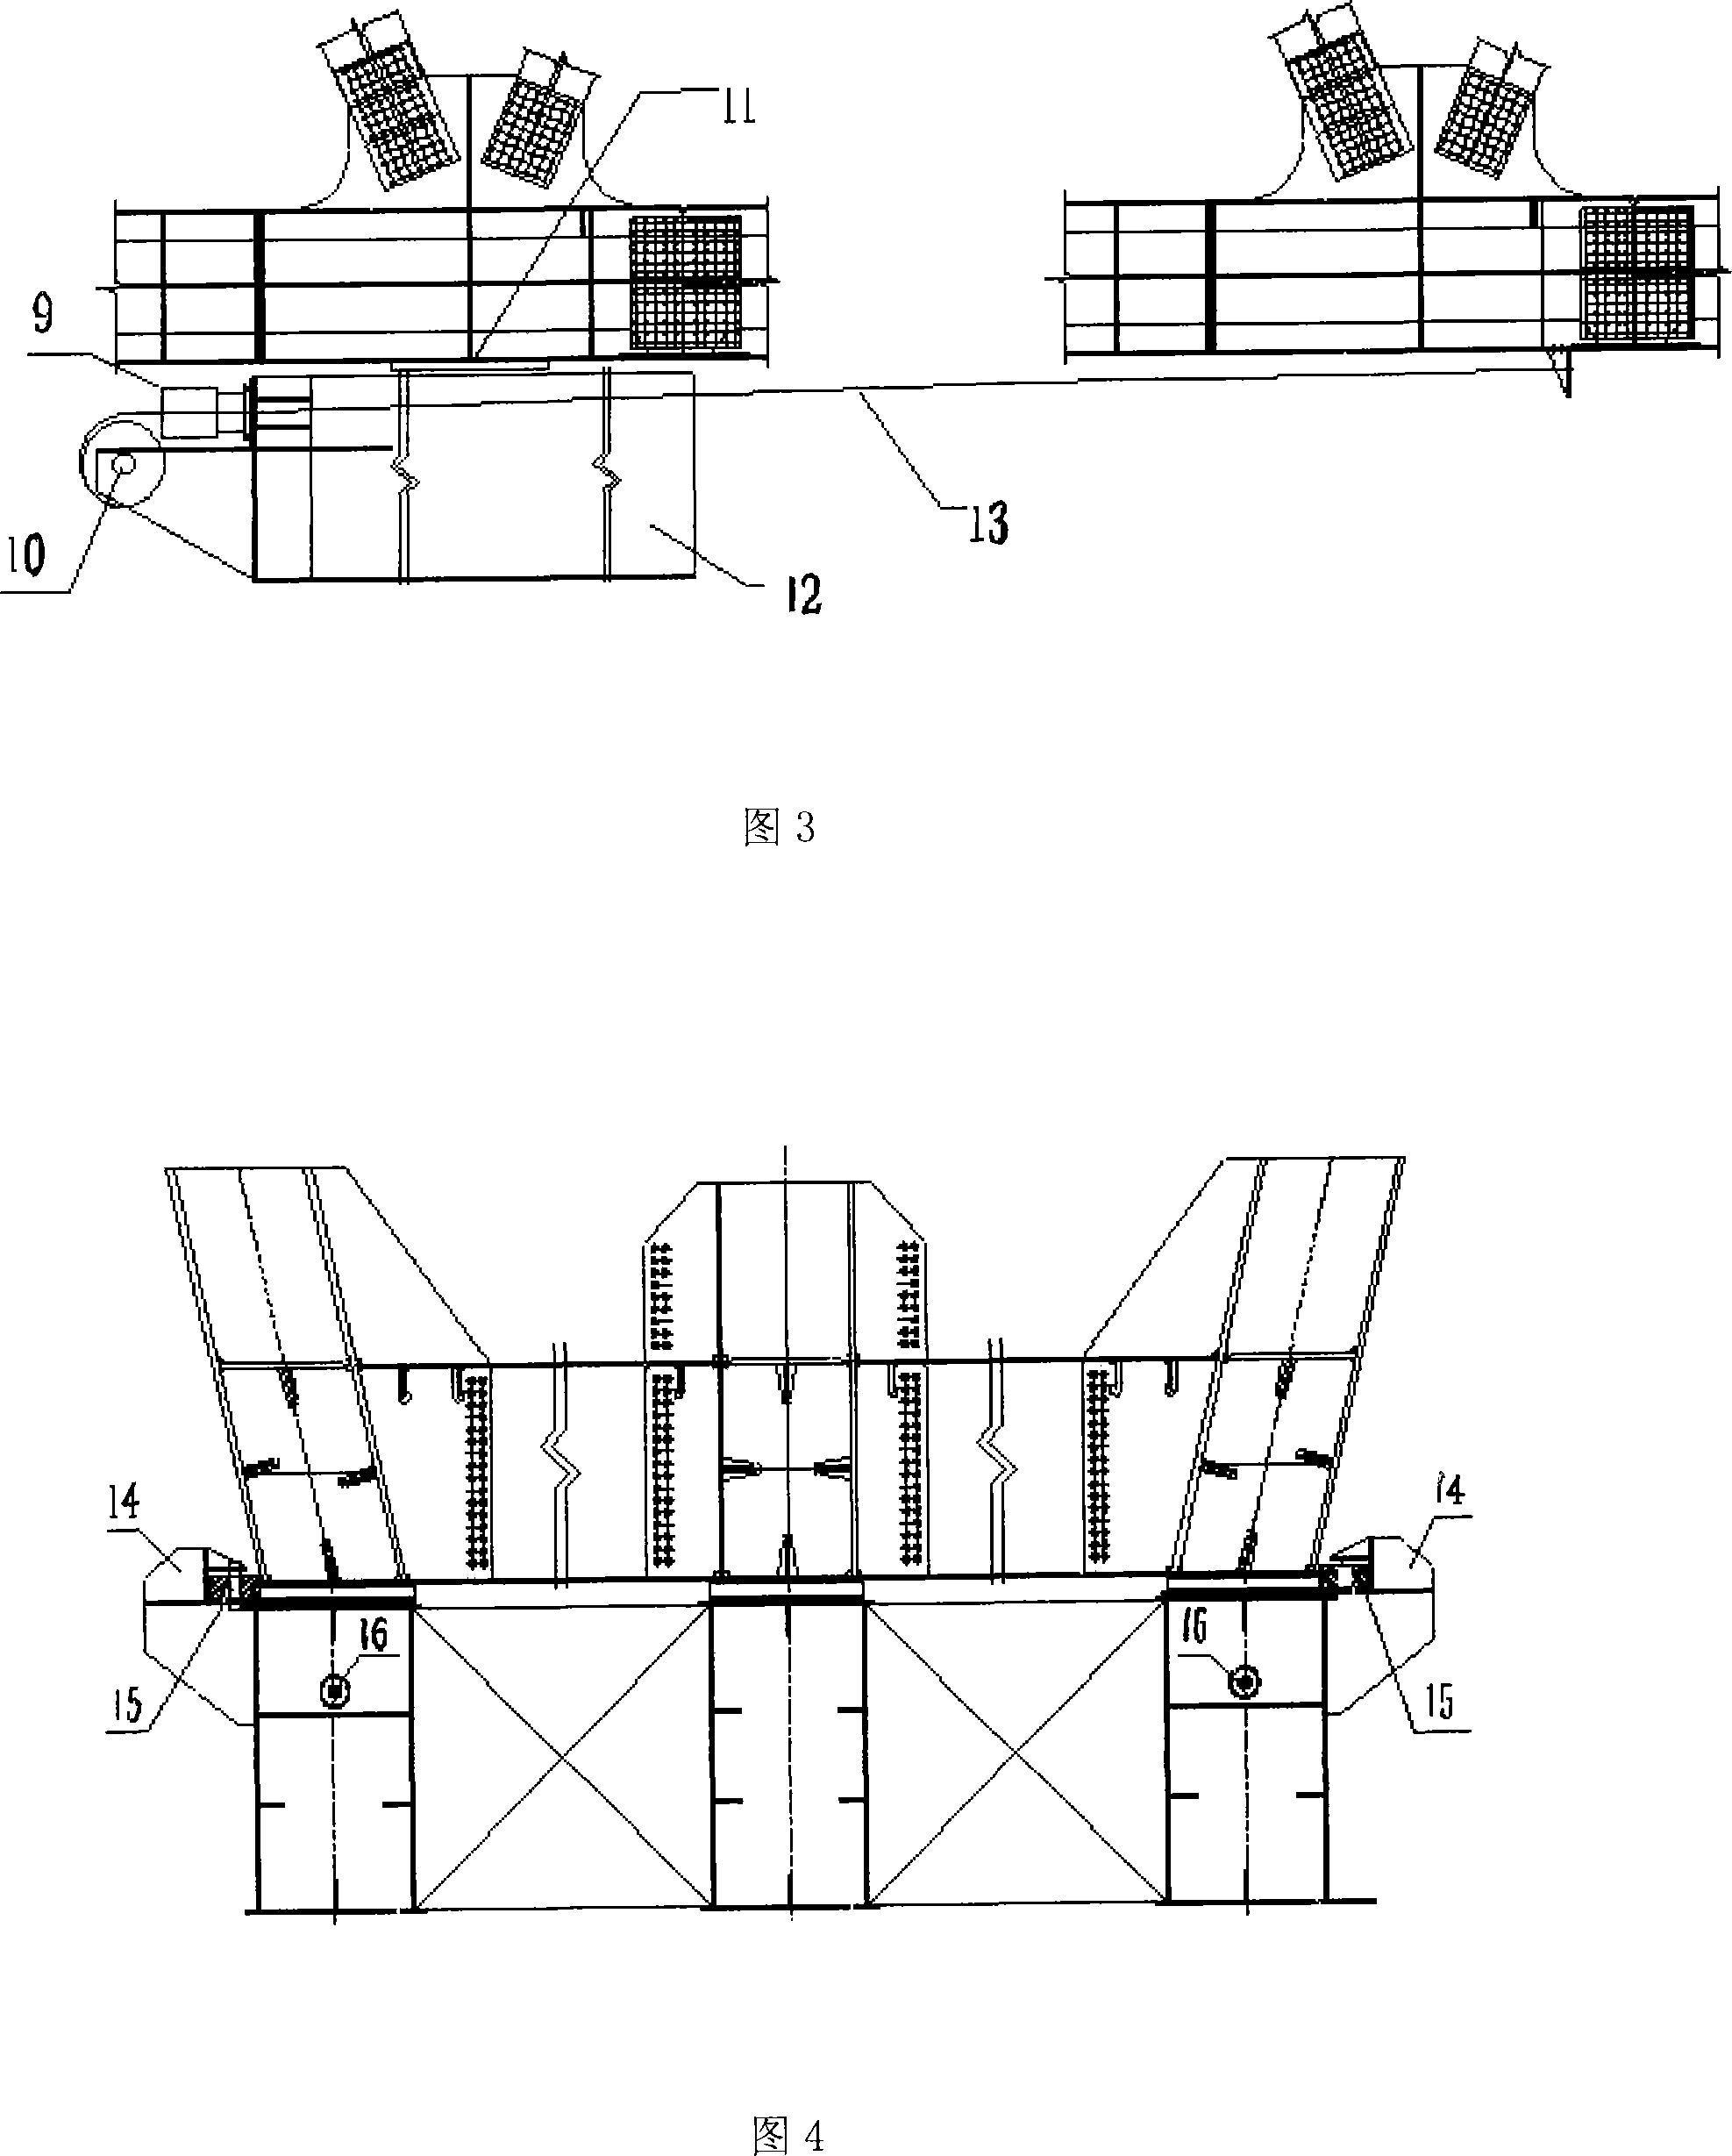 Portrait multi-point continuously dragging construction method for trussed steel beam